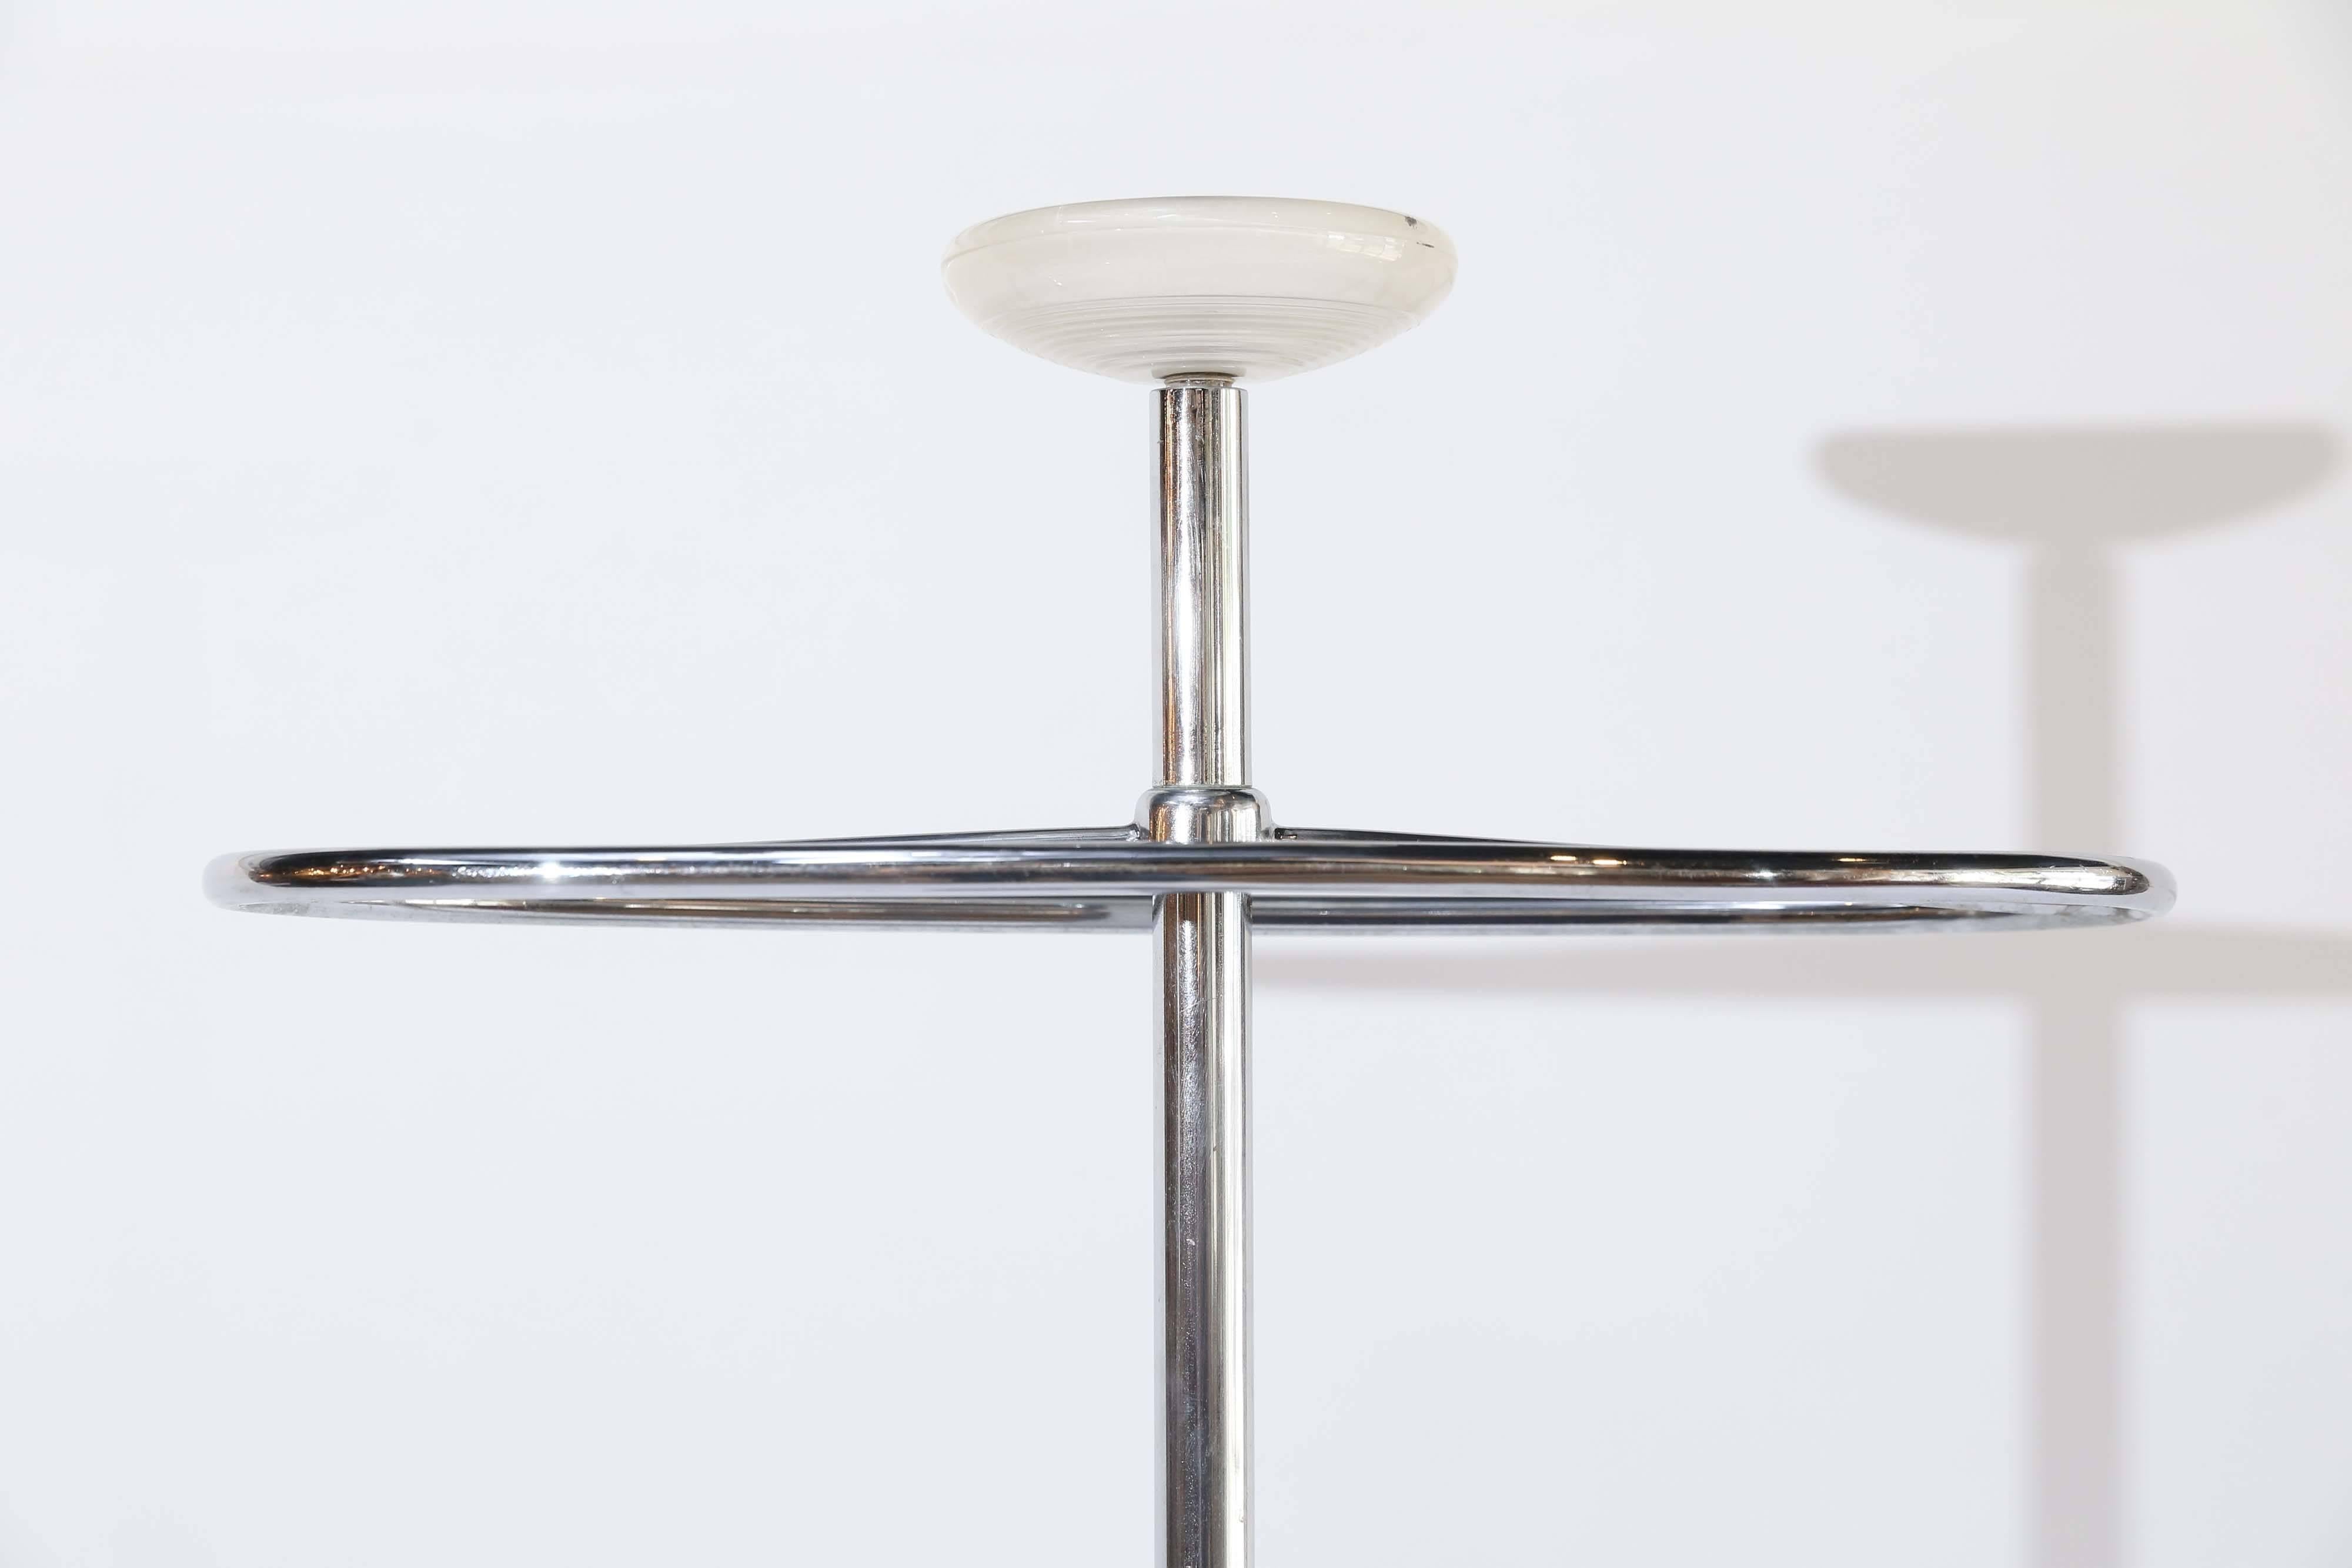 Mid-Century Modern Midcentury Standing Towel Holder from France